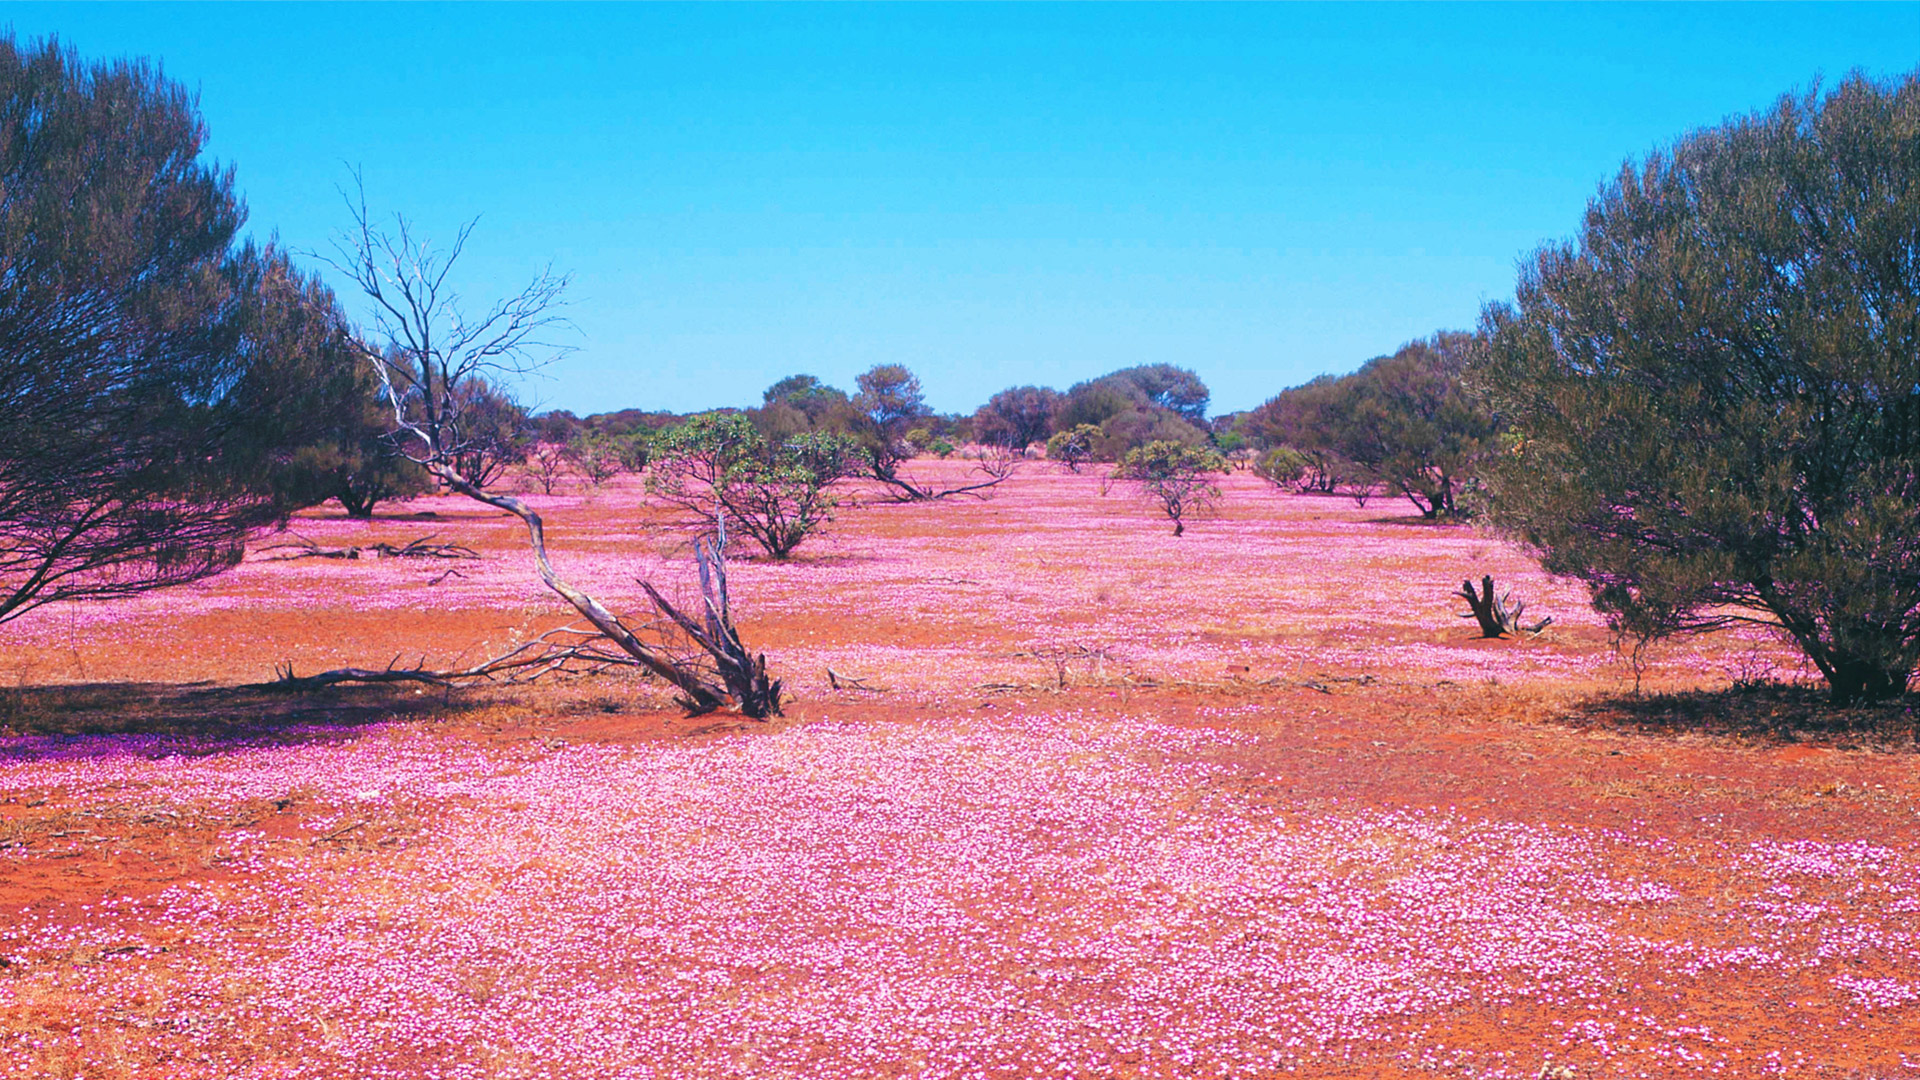 Field of pink wildfowers in the outback